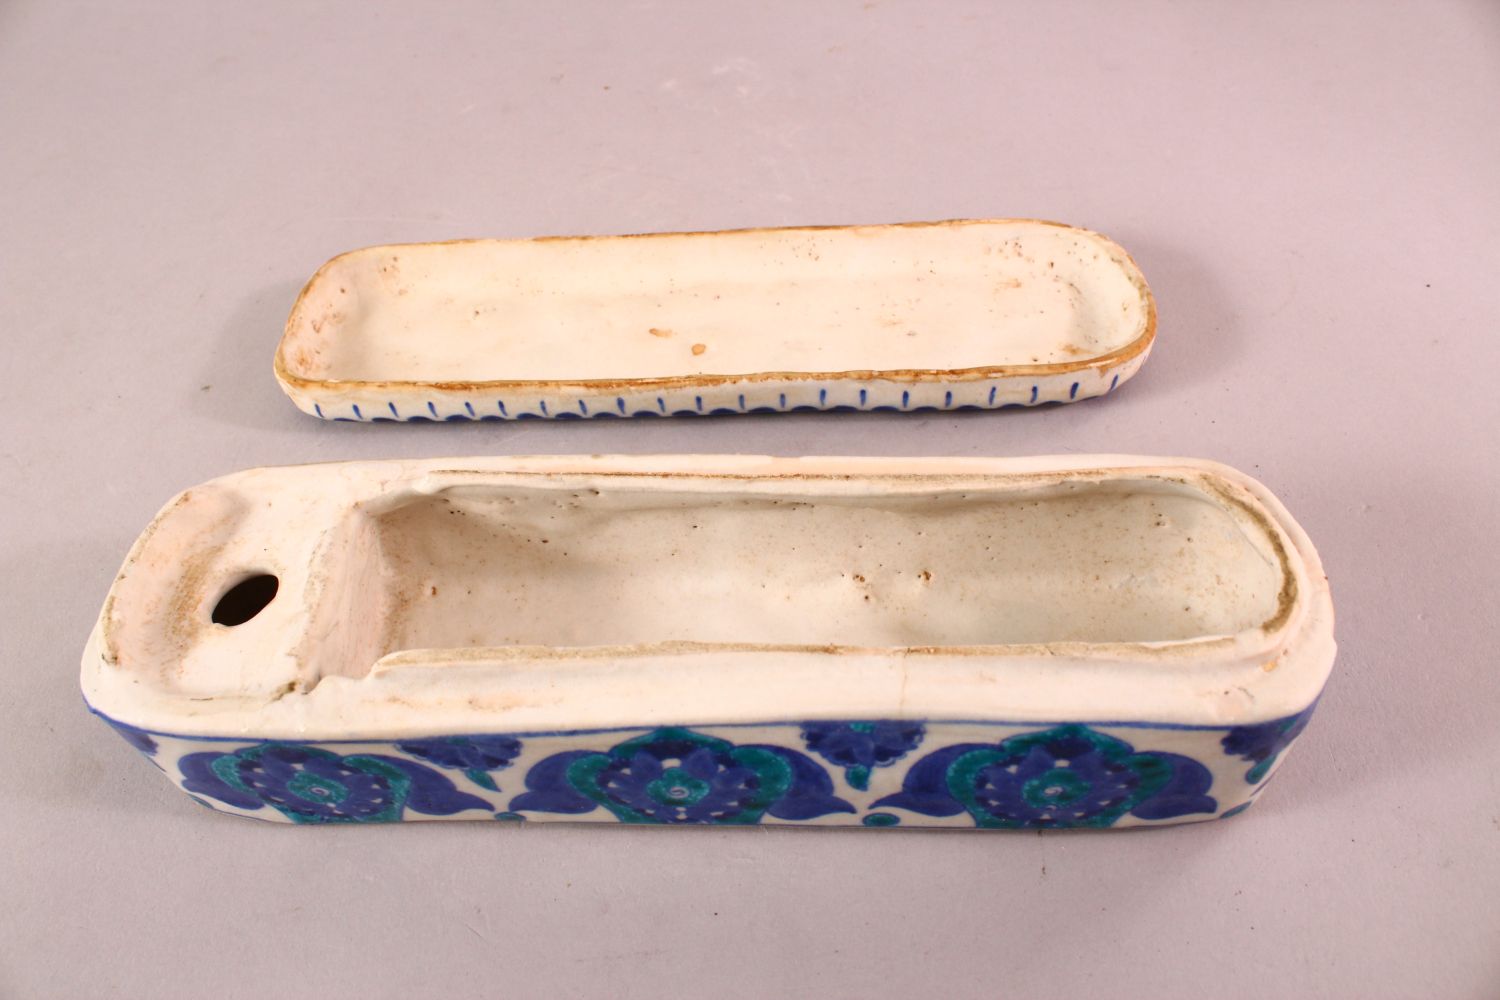 A TURKISH OTTOMAN KUTAHYA POTTERY PEN BOX & COVER, in blue and white floral decoration, 23cm - Image 3 of 4